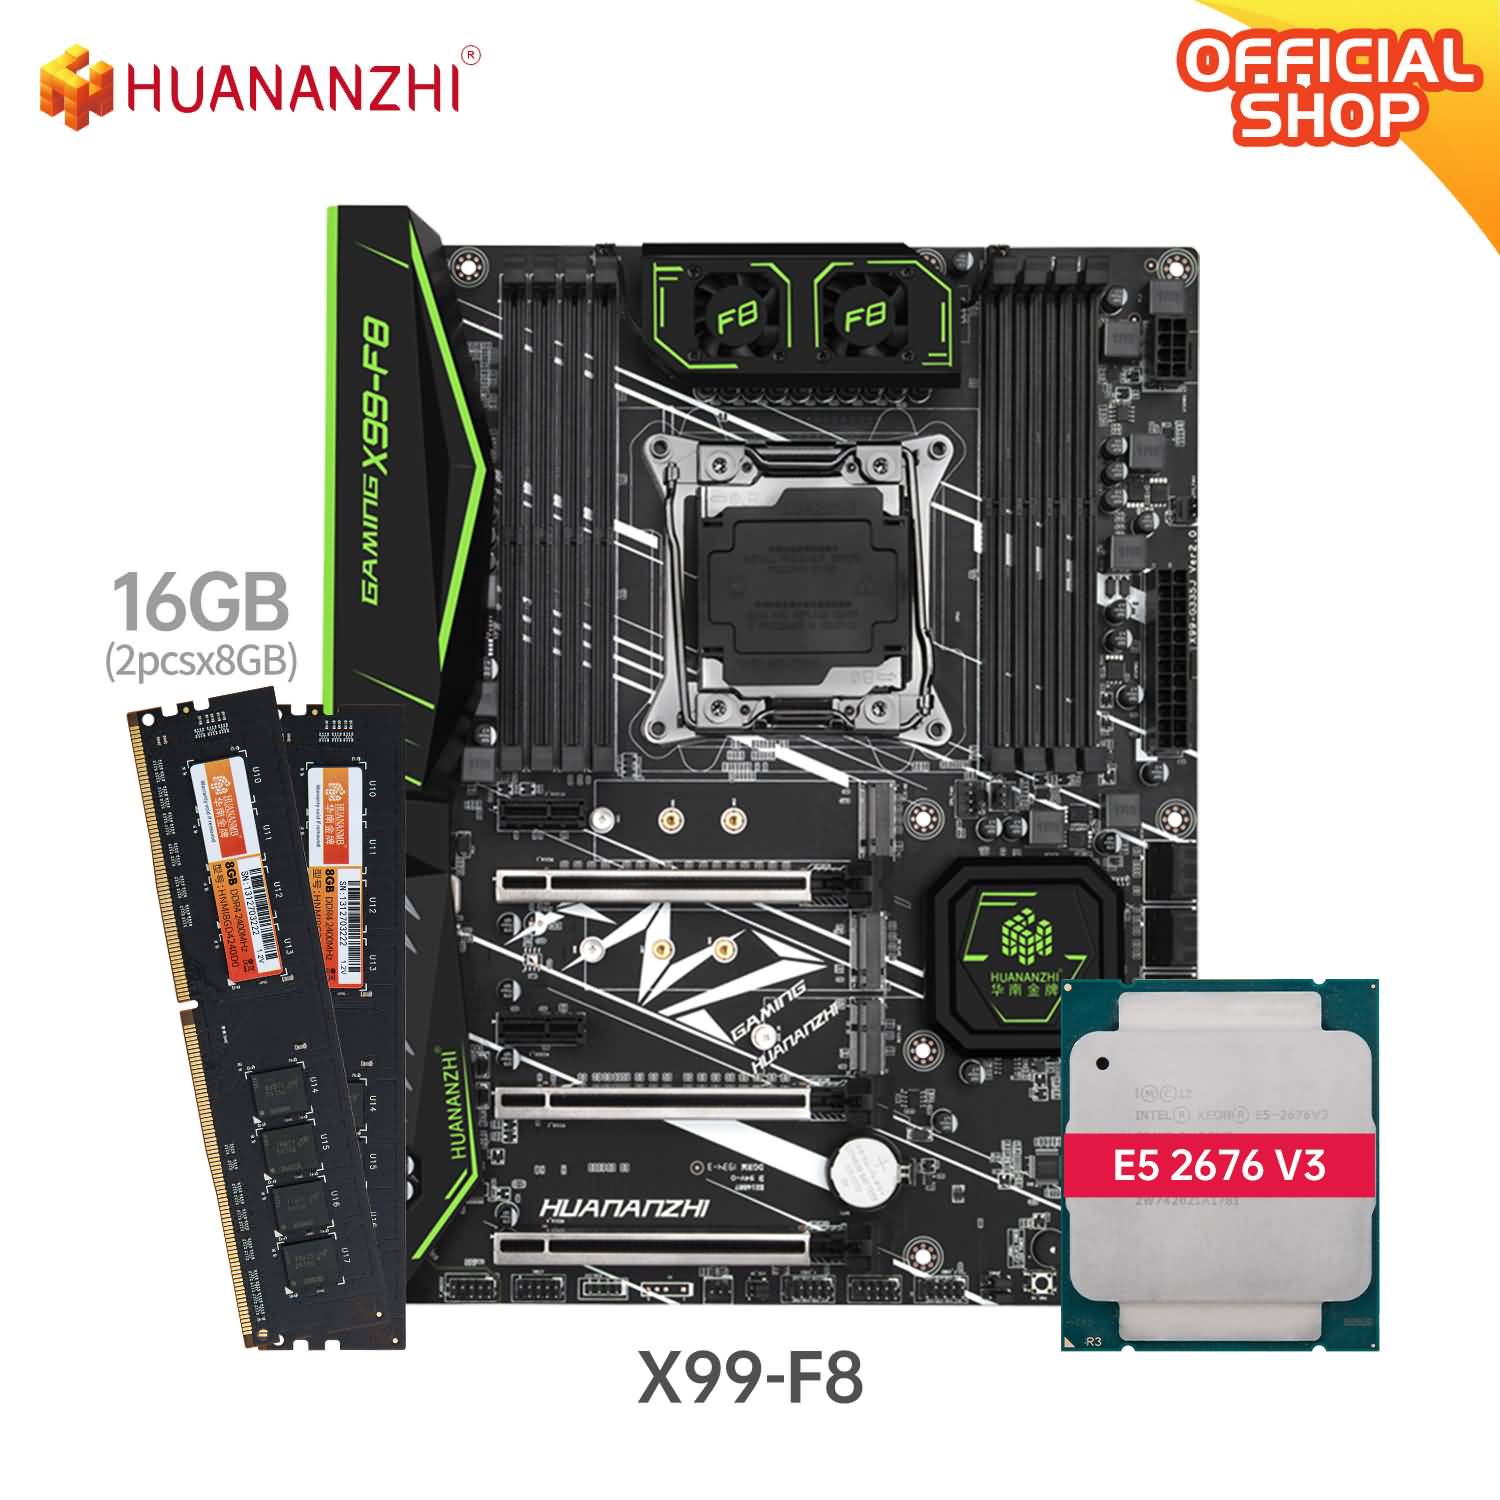 Buy Huananzhi X99 F8 X99 Motherboard With Intel Xeon E5 2676 V3 With 2 